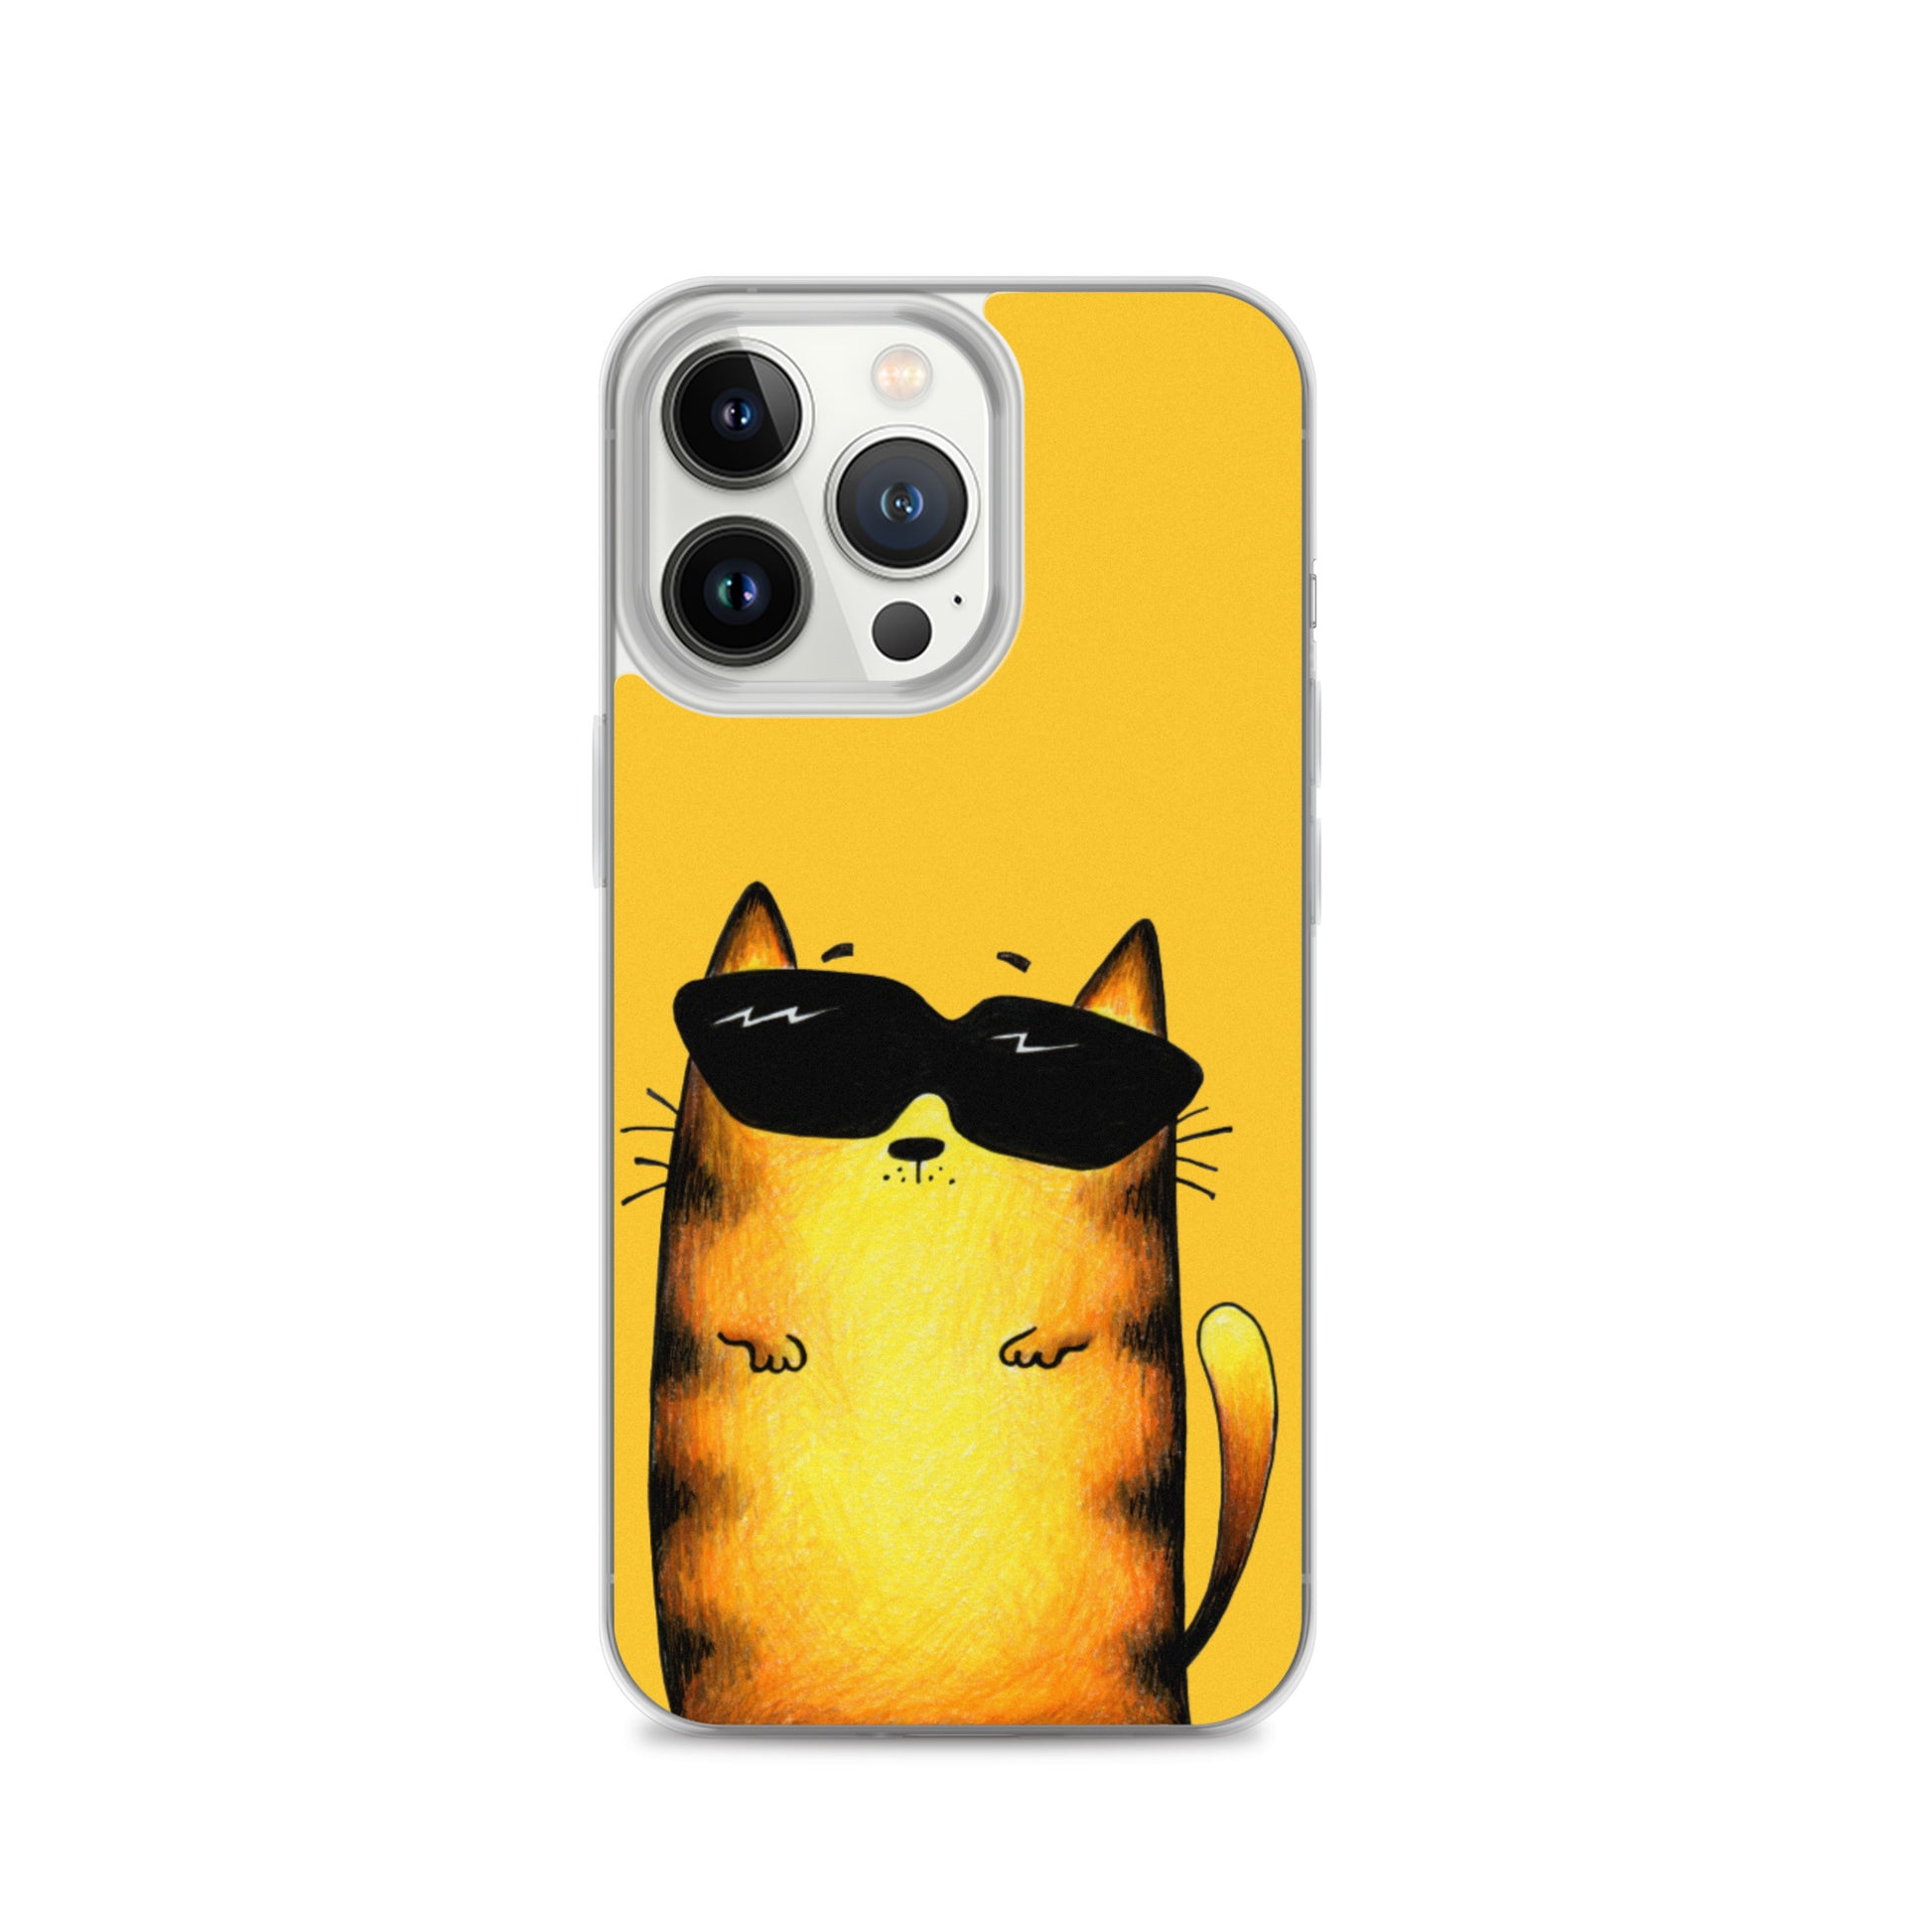 flexible yellow iphone 13 pro case with cat print